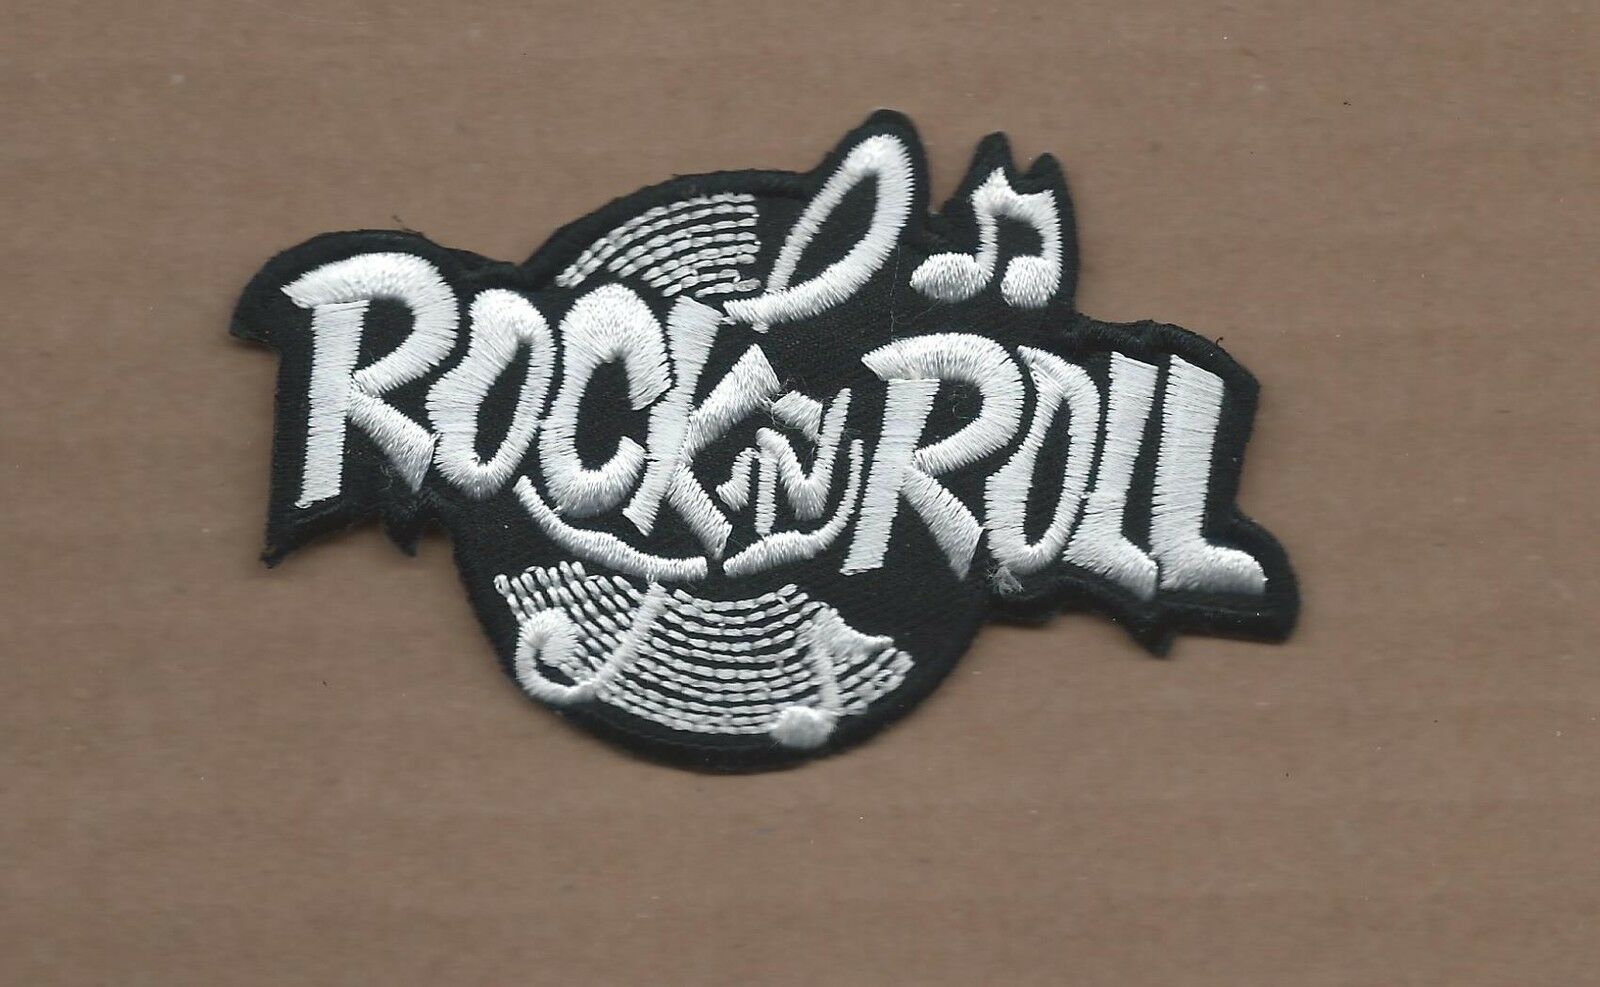 New 2 3/8 X 3 7/8 Inch Rock N Roll Iron On Patch Free Shipping